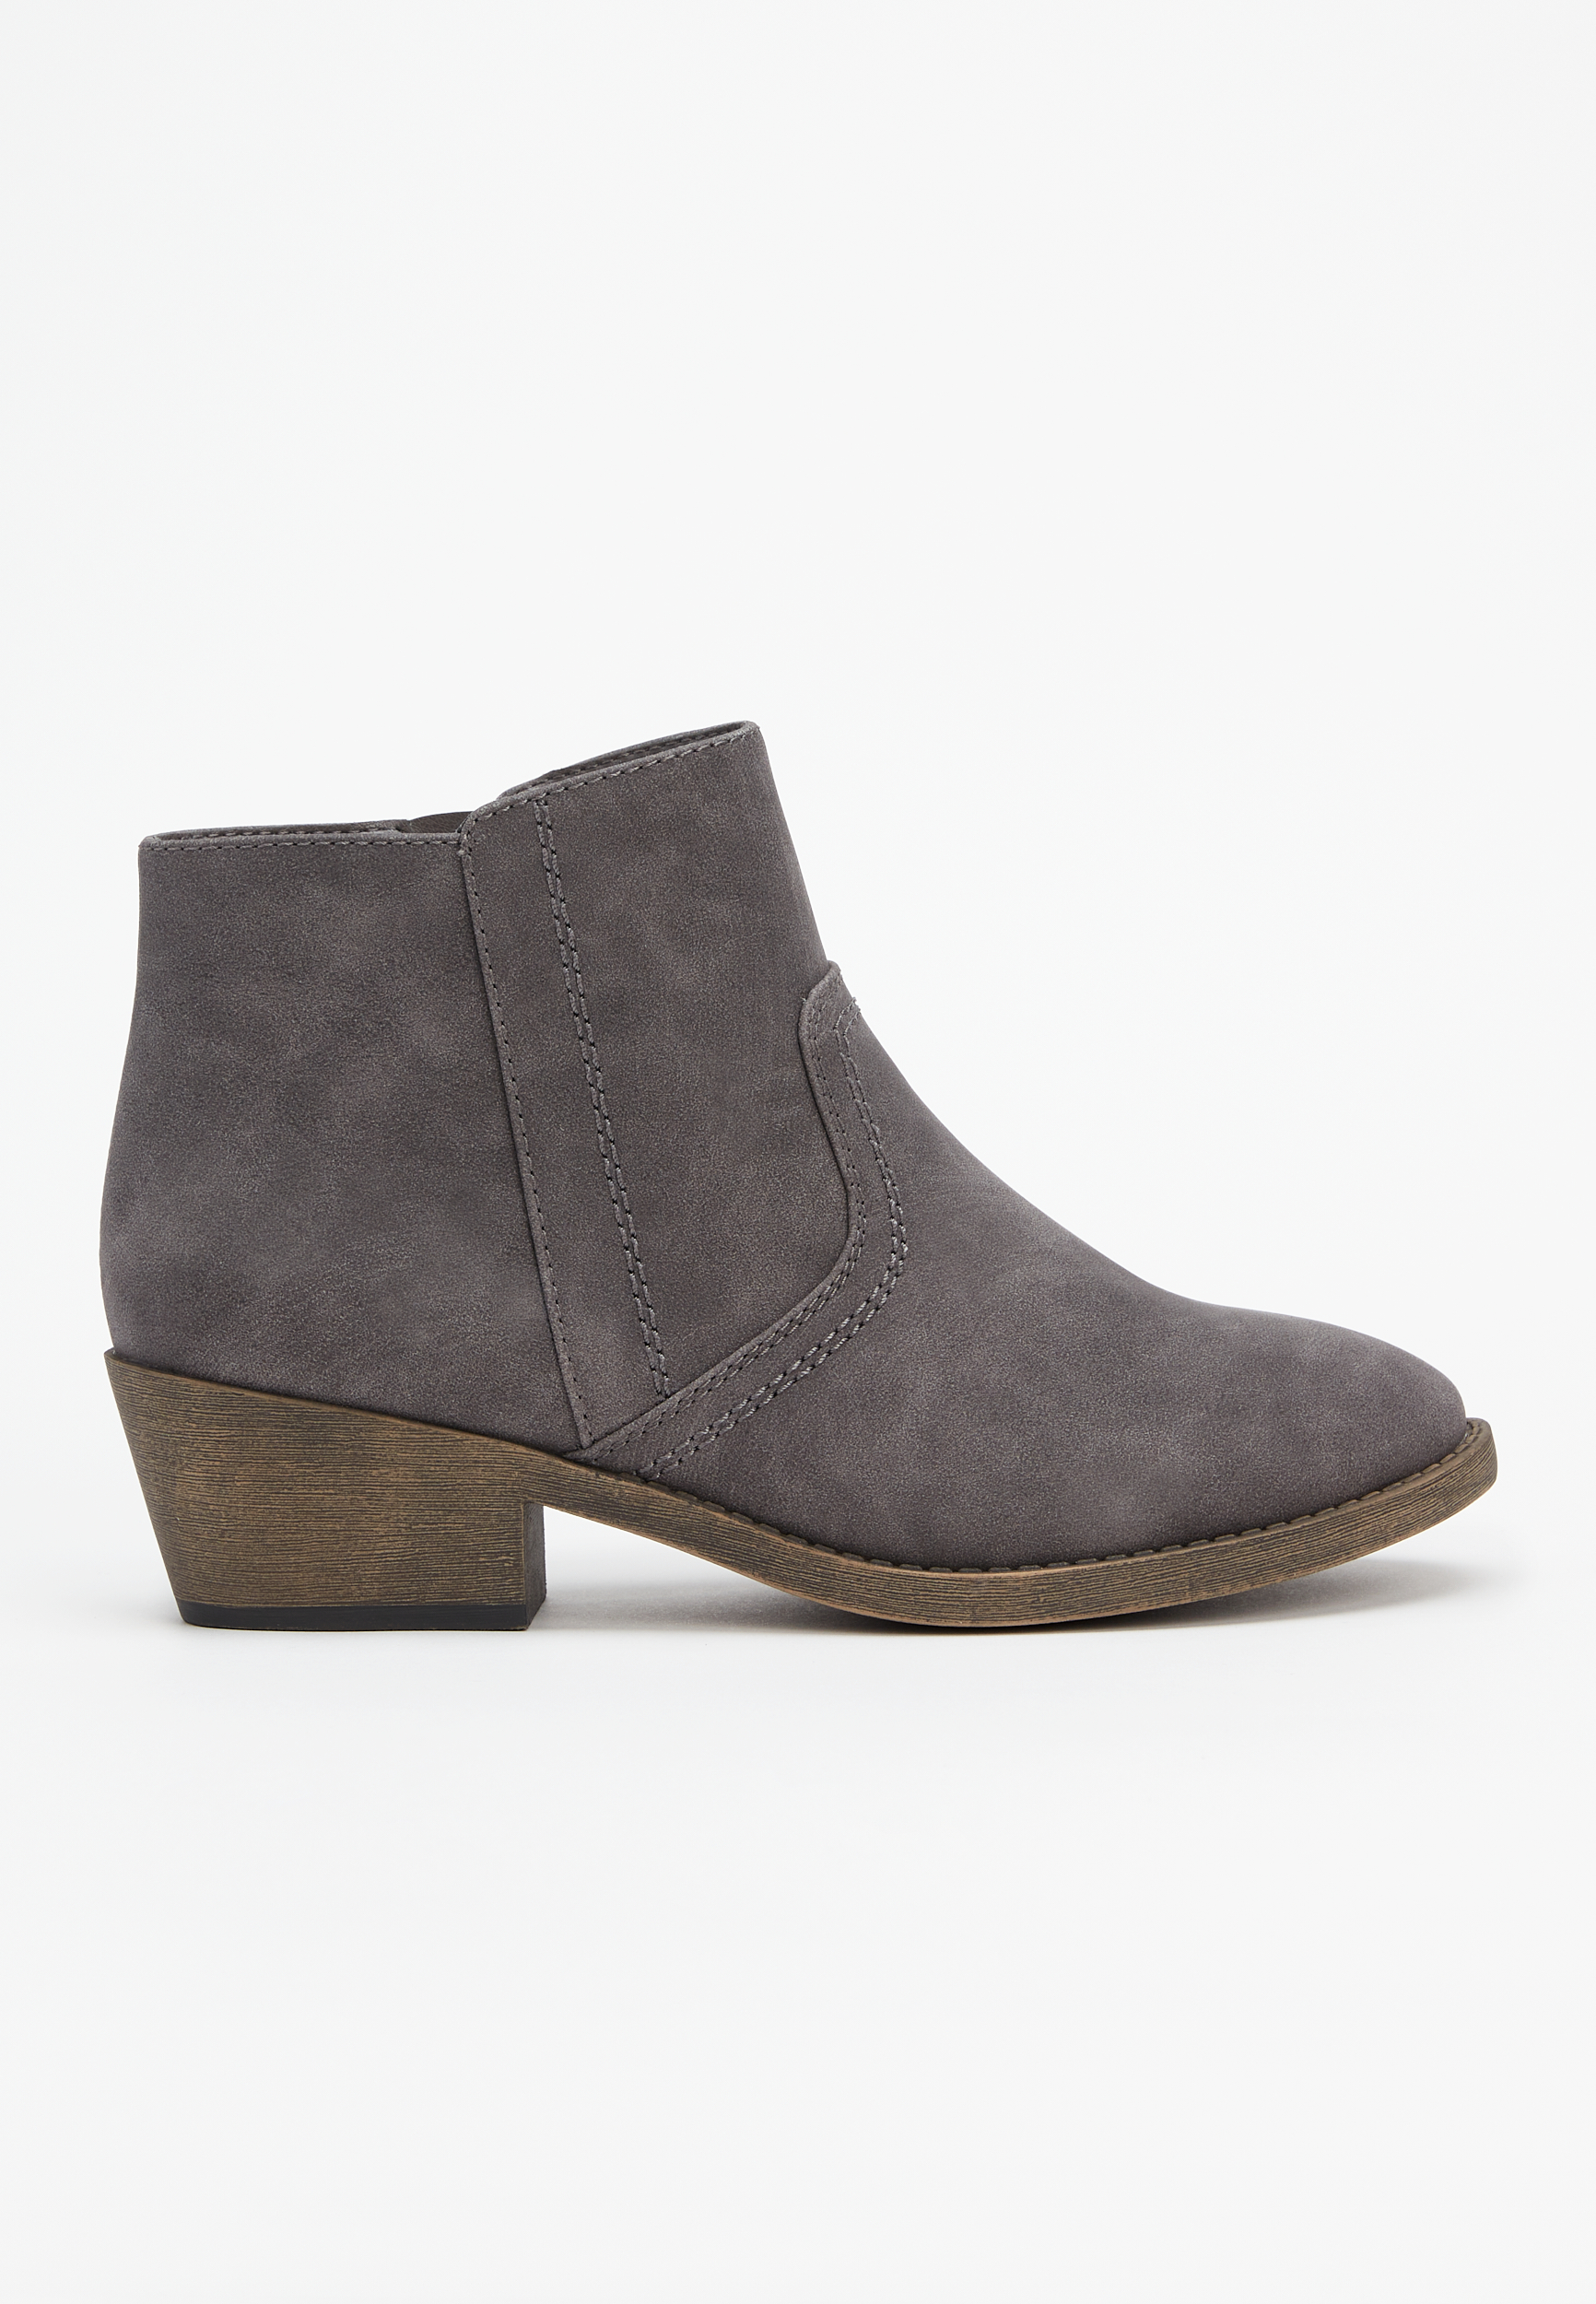 Women's Boots | Ankle, Hiker & Duck Boots For Winter | maurices